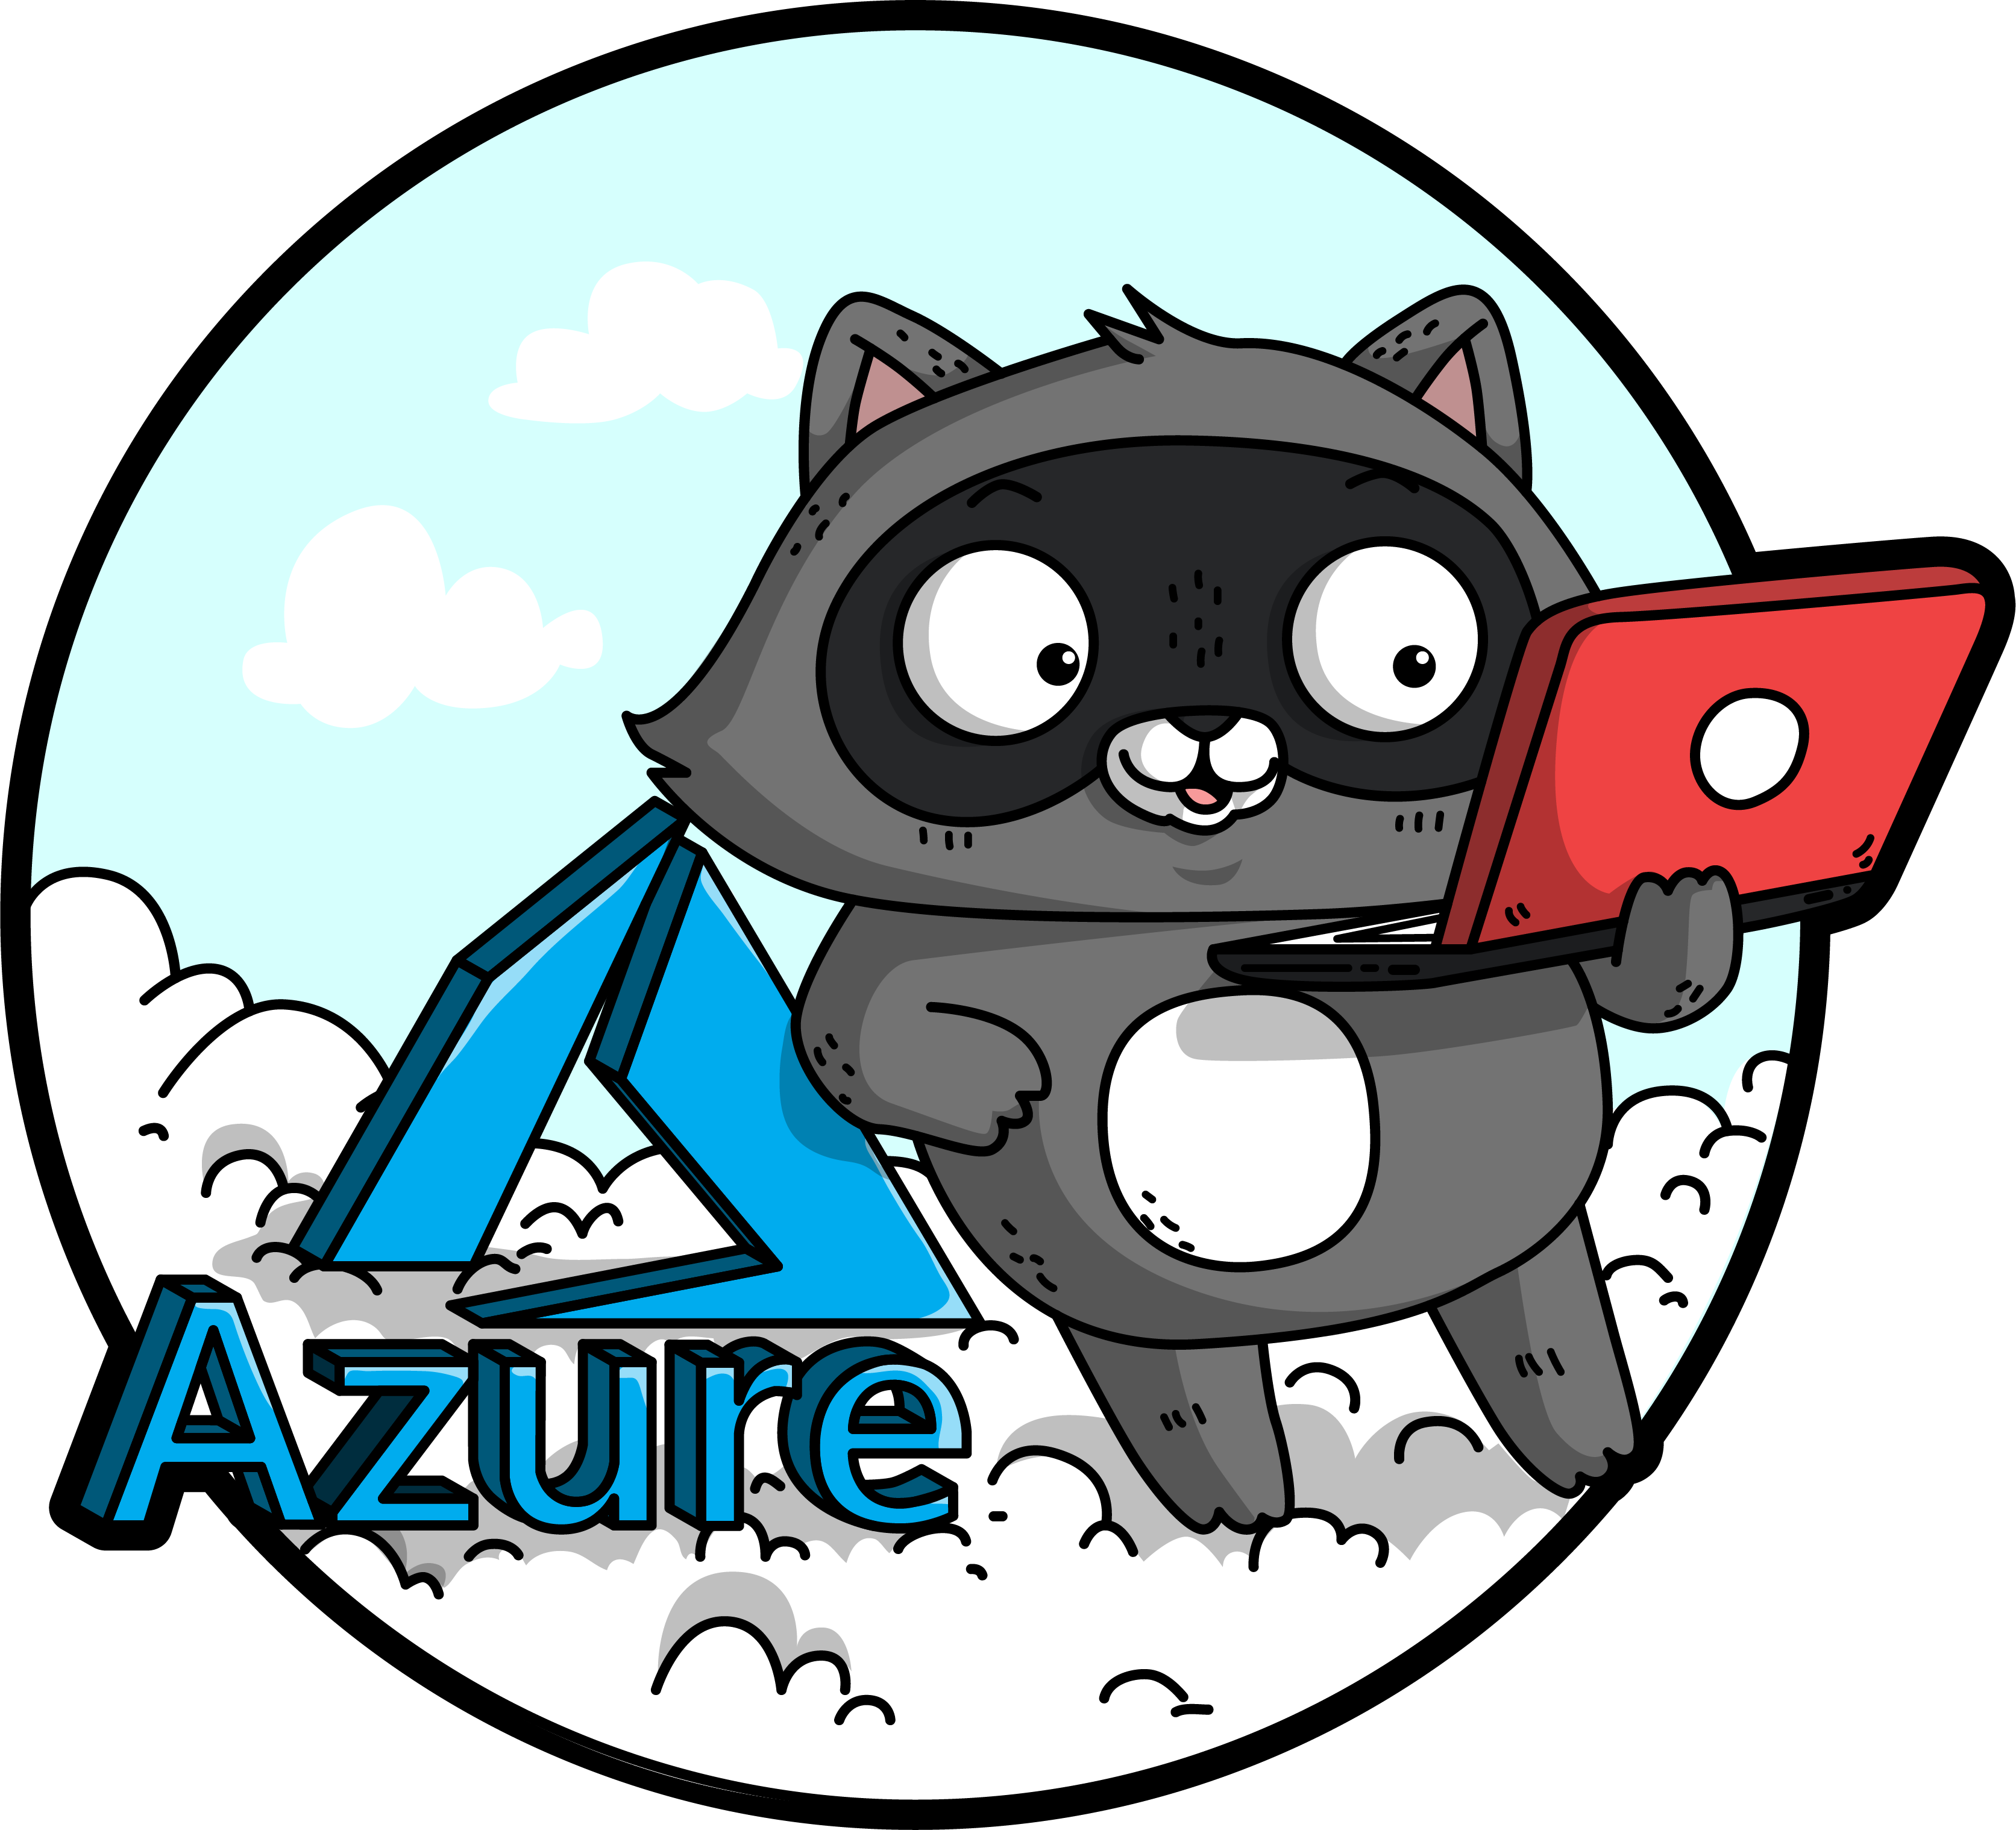 Bit (the raccoon) on a cloud with the Azure logo